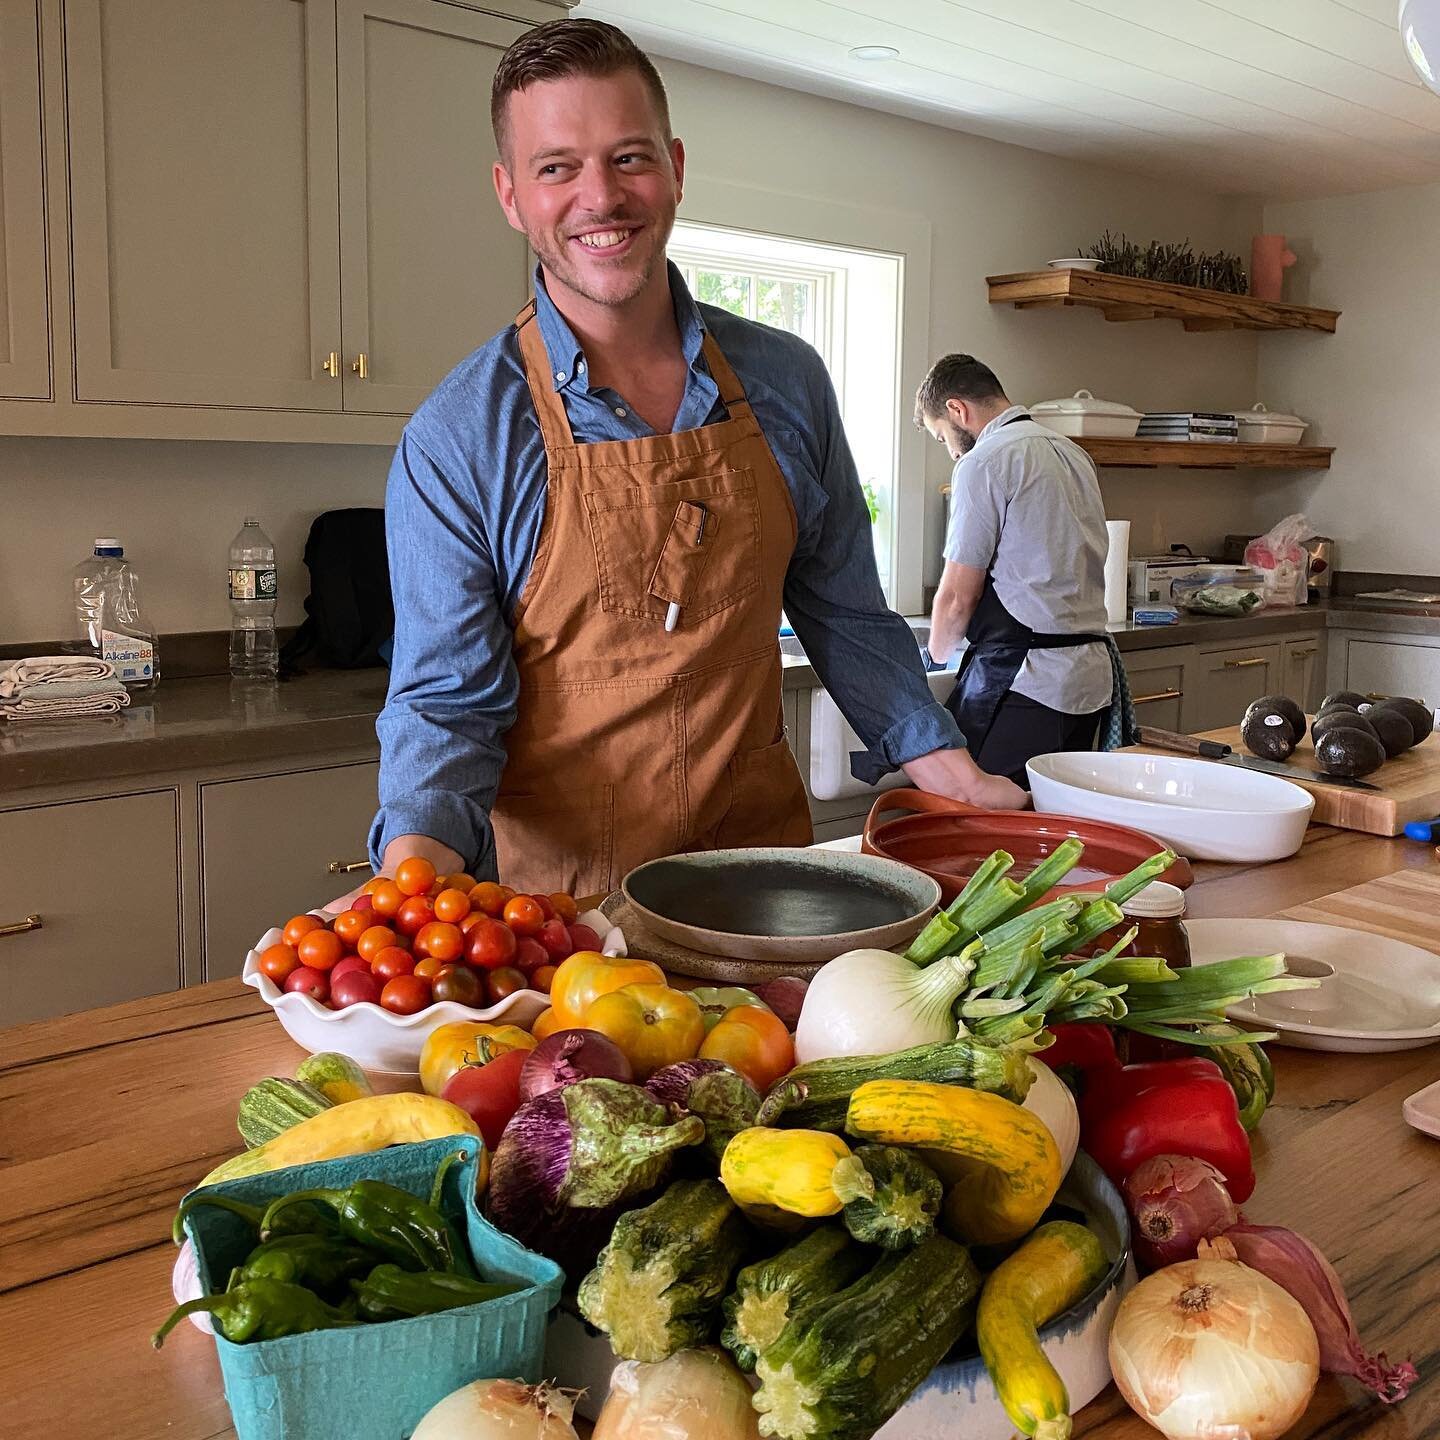 My happy place, cooking amazing farm to table food for my clients 🍅 🫑 🌿 

#fresh #produce #farm #farmersmarket #eat #local #chefs #food #foodie #smallbusiness #yummy #vegan 
#chef #chefsofinstagram #gaychef #farmtotable #privatechef #chefslife